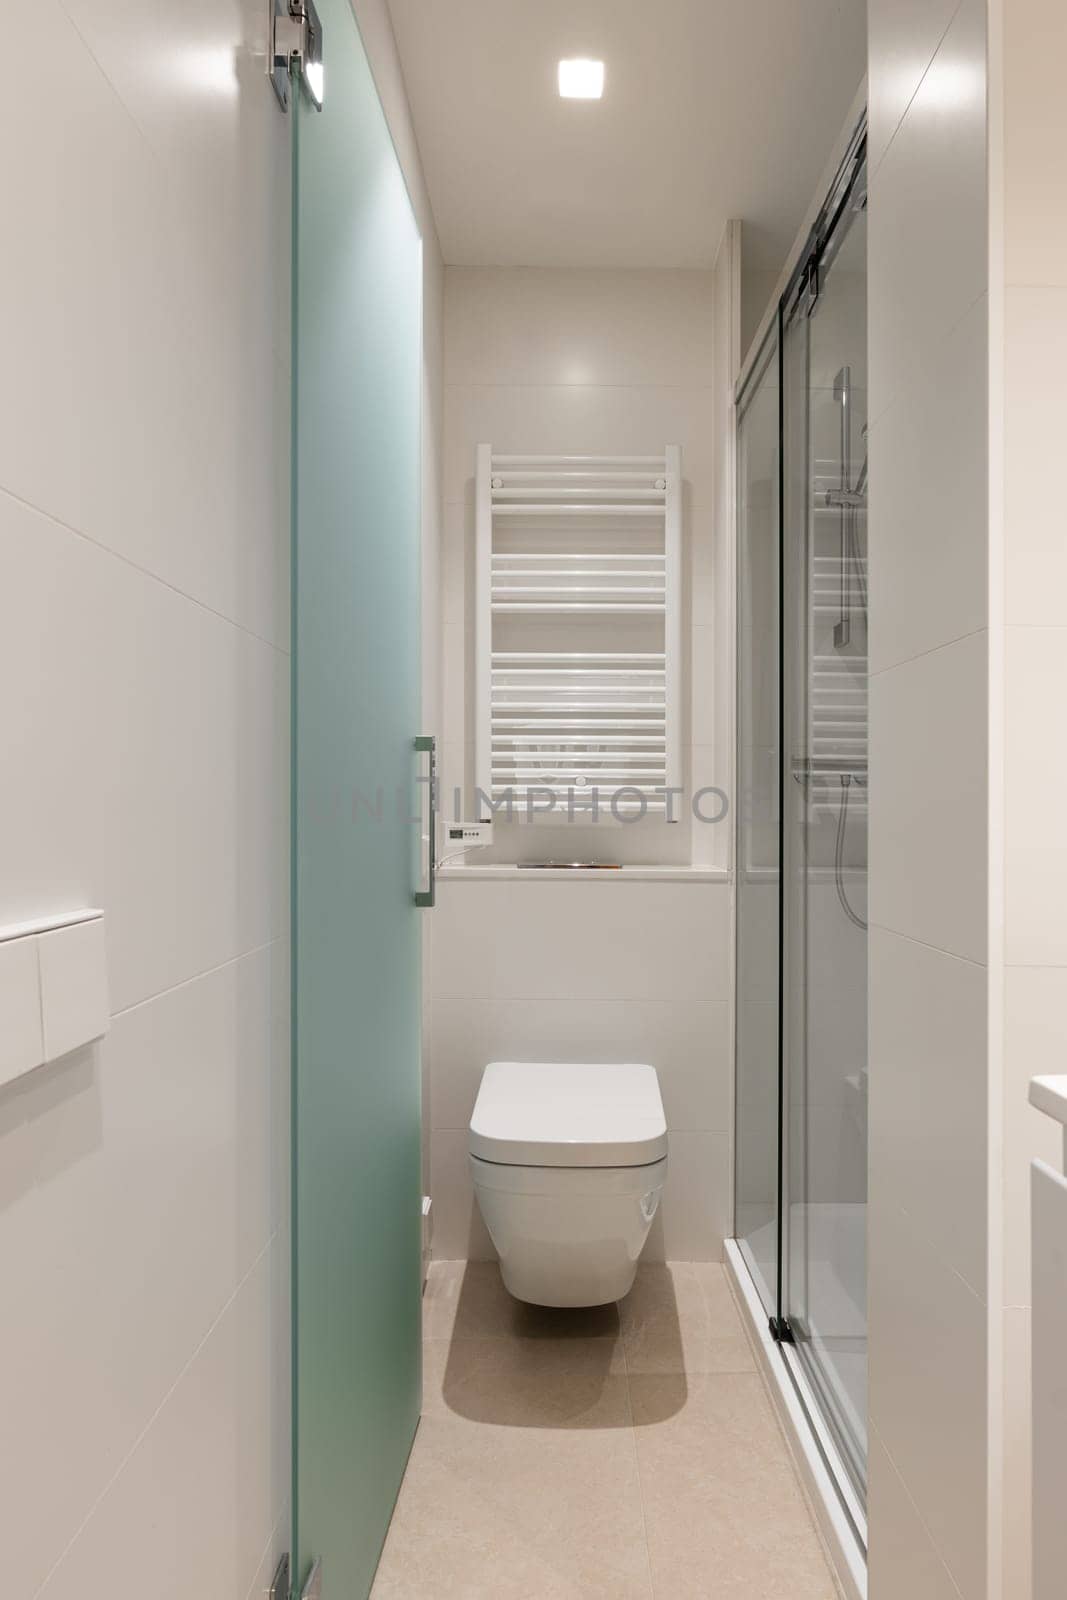 Bright and modern minimalist bathroom featuring a wall-mounted toilet, glass shower, and clean lines. Ideal for contemporary home interior design.